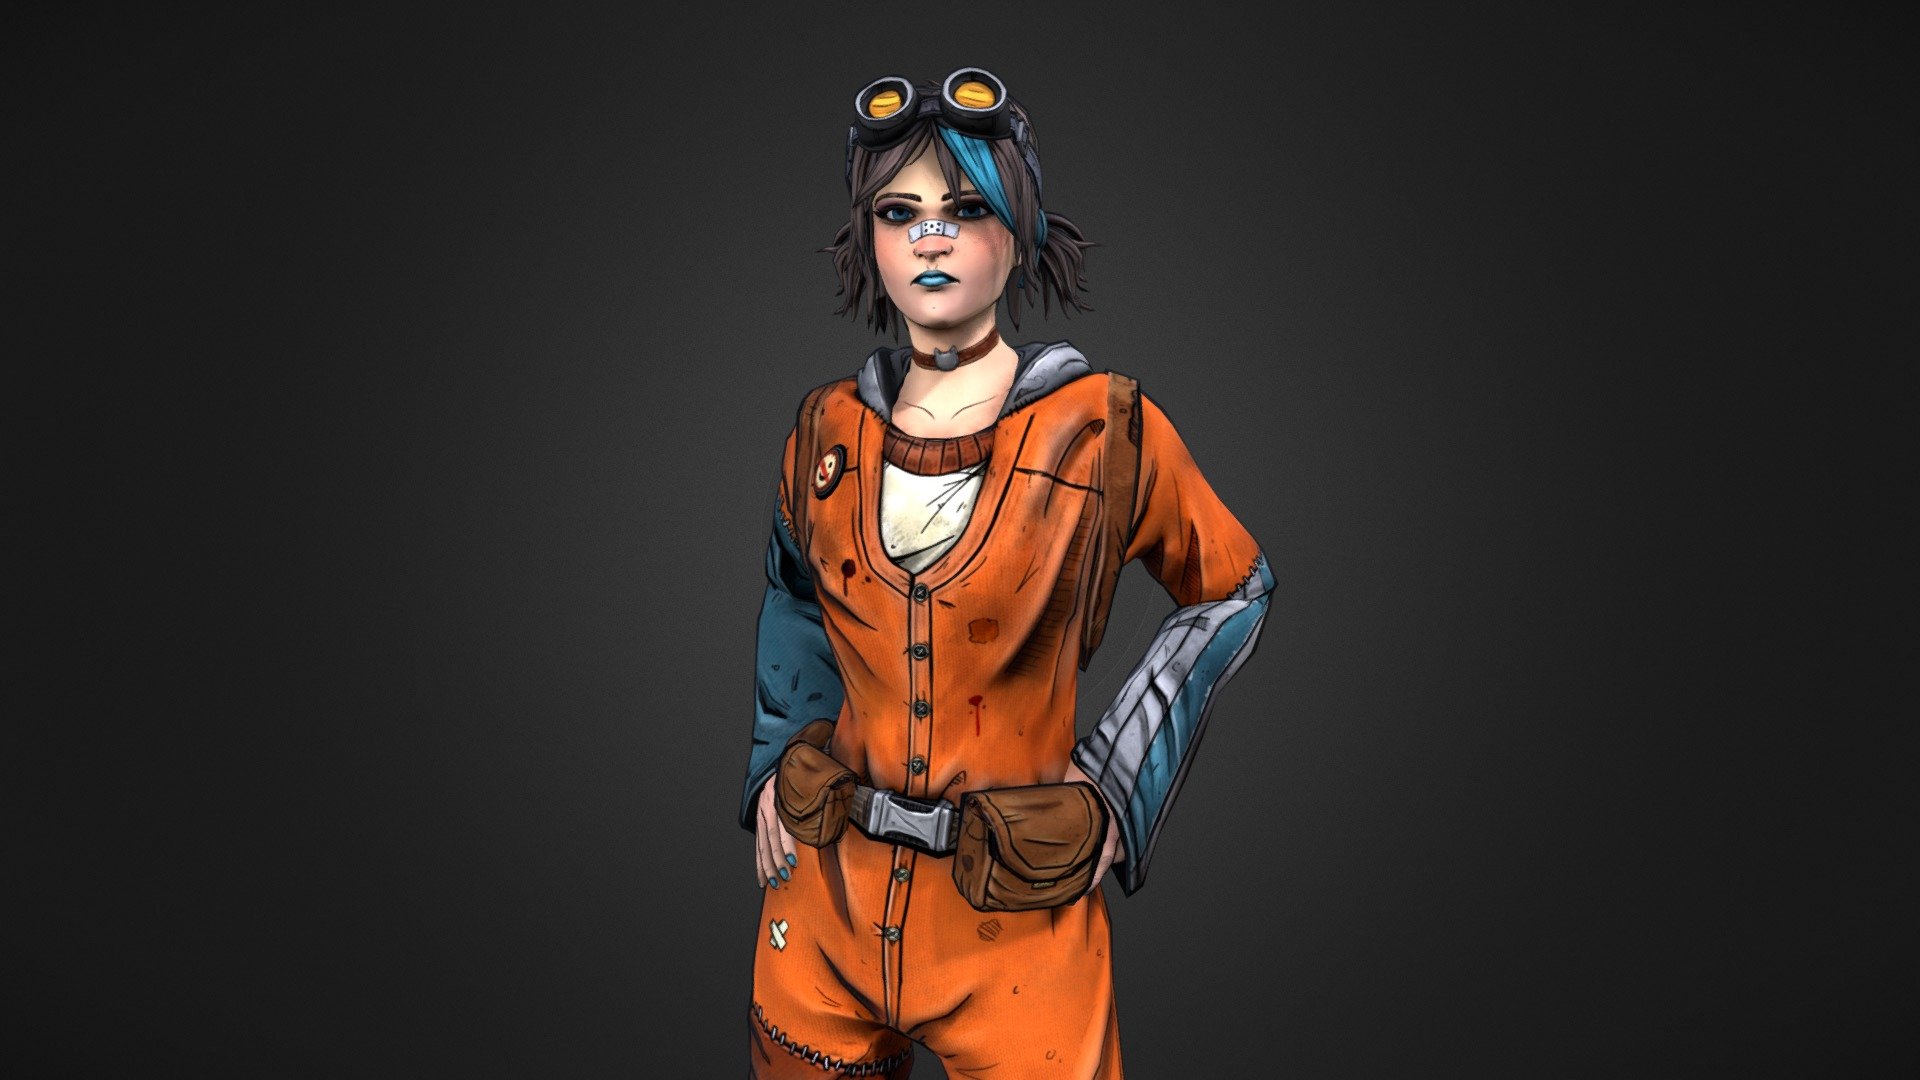 Artstation page: https://www.artstation.com/artwork/4rxXL

A new Borderlands-inspired character I made for the Grads in Games Rising Star 2018 Character Art competition.
Ash is a teenager who’s grown up on Pandora [the setting of the Borderlands games], a savage wasteland of a planet filled with bandits and monsters. Naturally, having grown up there and now in her late teenage years, she’s jaded and bored by the whole experience, spending her days scavenging the barren wastes and looking for something interesting 3d model